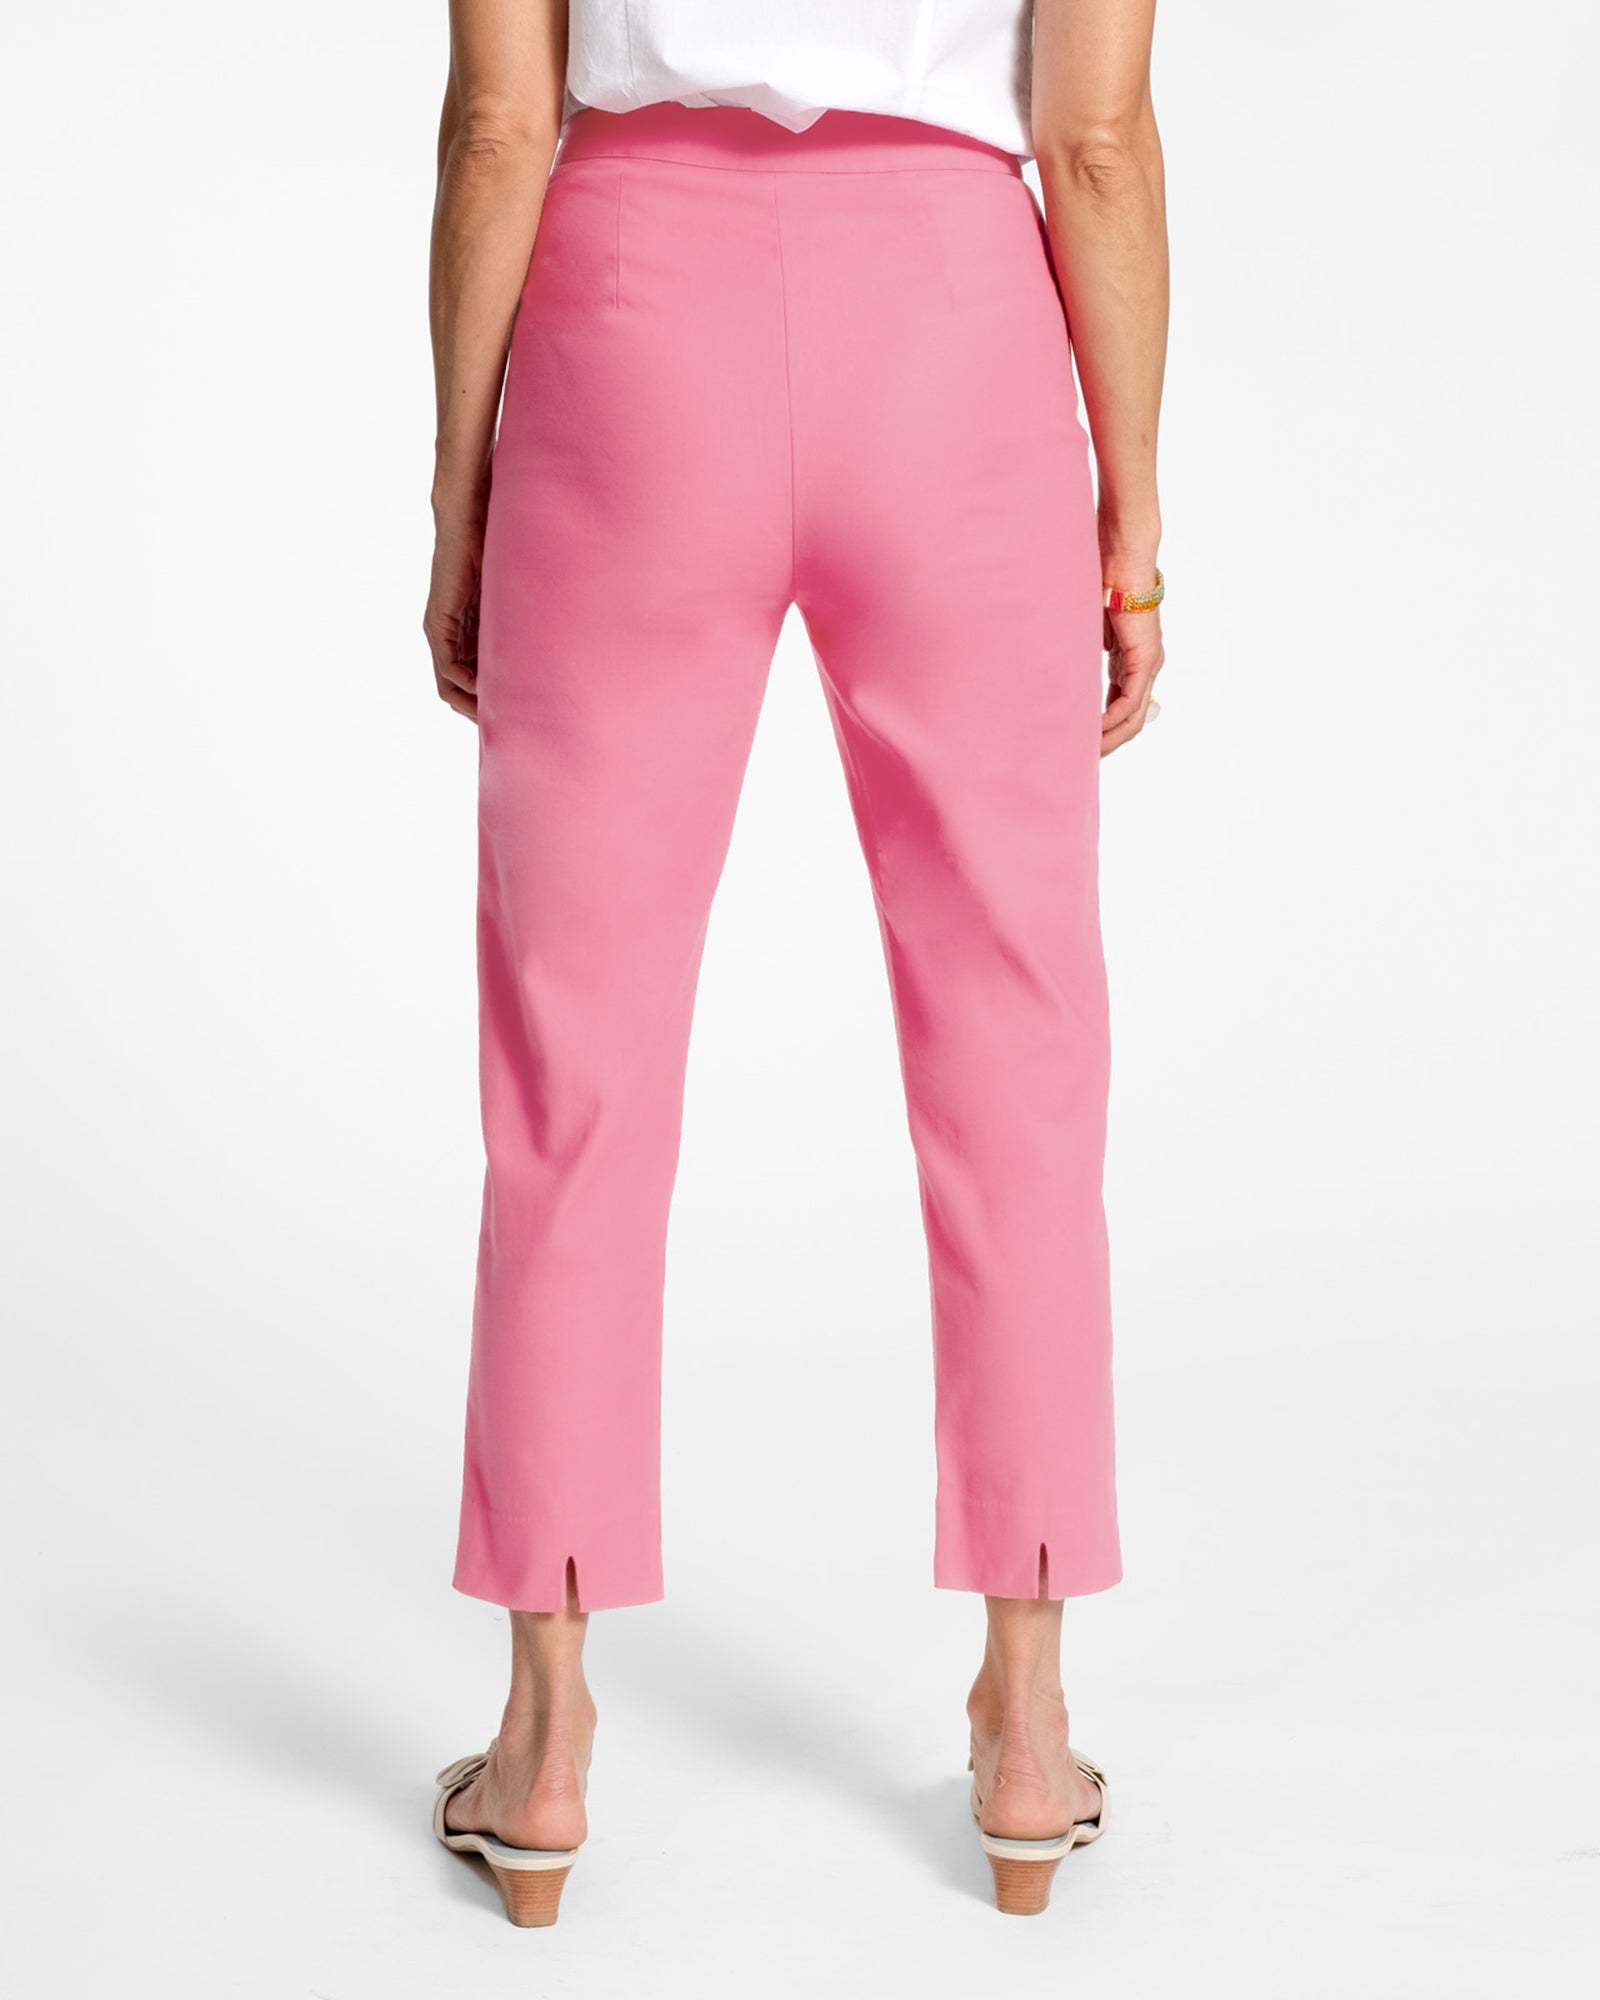 Lucy Pant Solid Cotton Stretch FV Pink